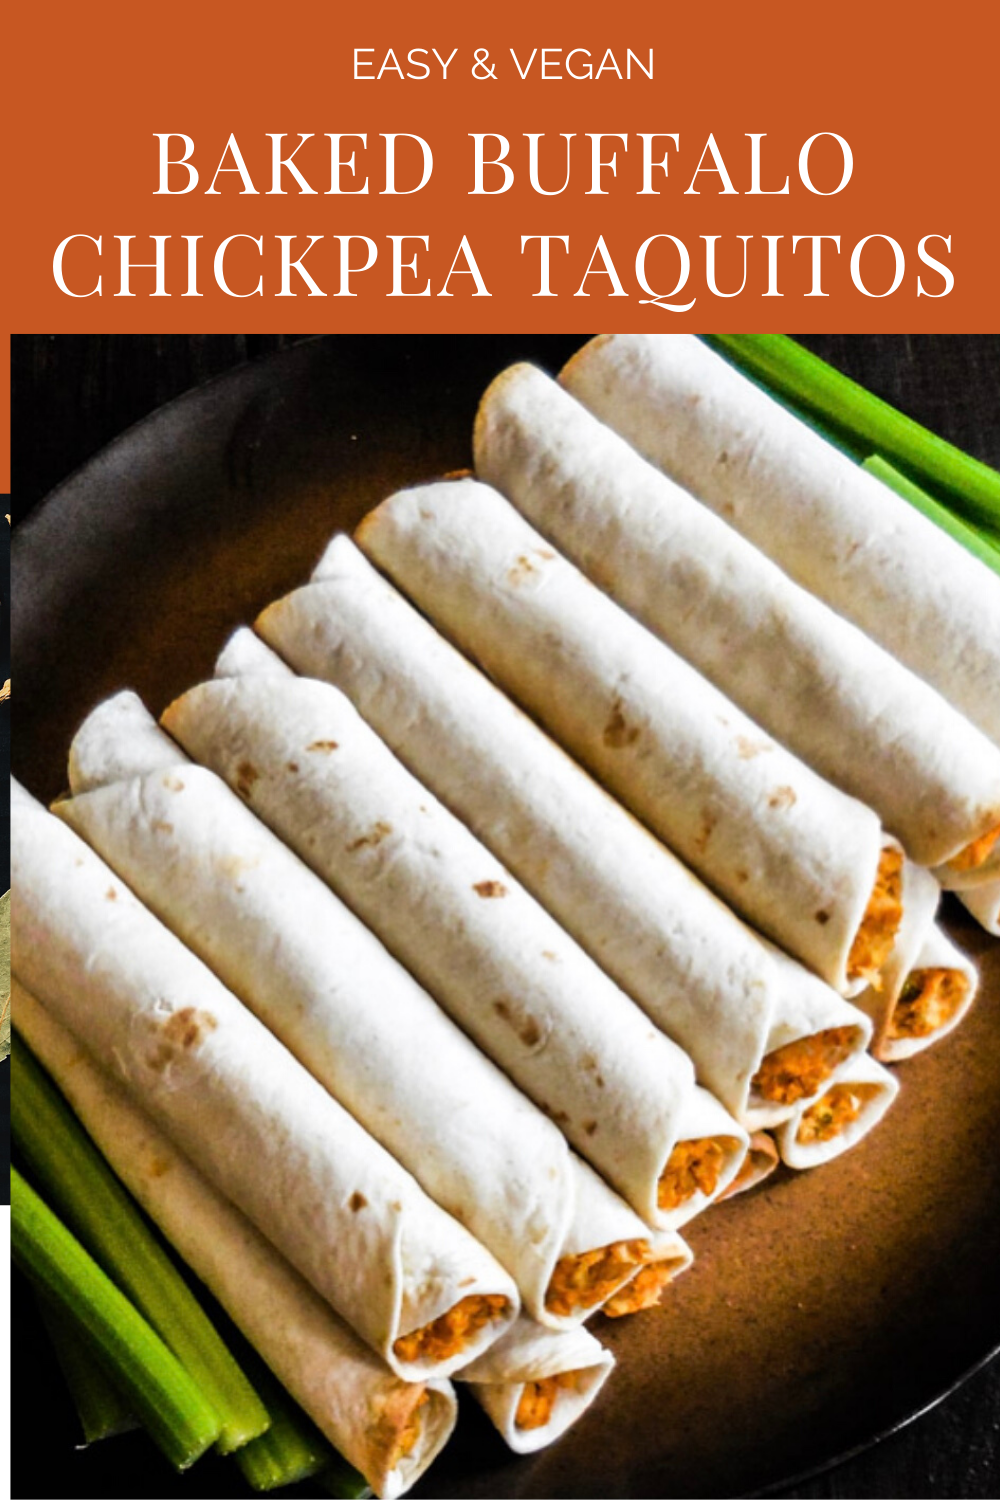 Baked Buffalo Chickpea Taquitos | Perfect finger food for casual get-togethers or snacking on game day! Ready to serve 30 minutes or less, these baked taquitos are super easy to make and always a hit!  via @thiswifecooks